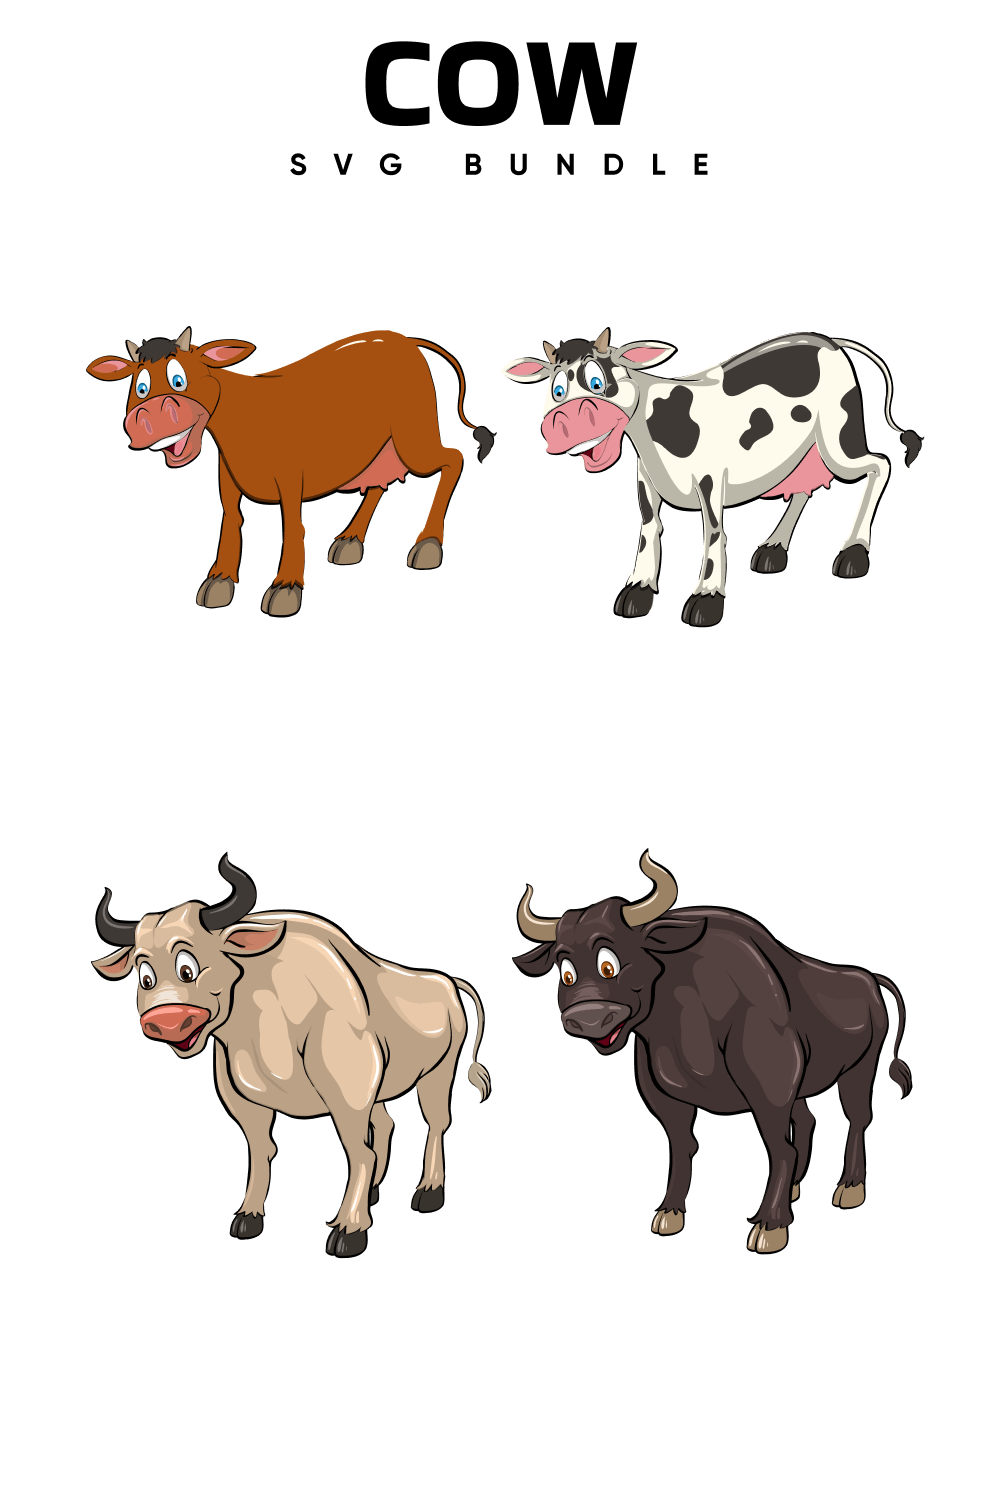 White and black bulls, and brown and white and black cows.